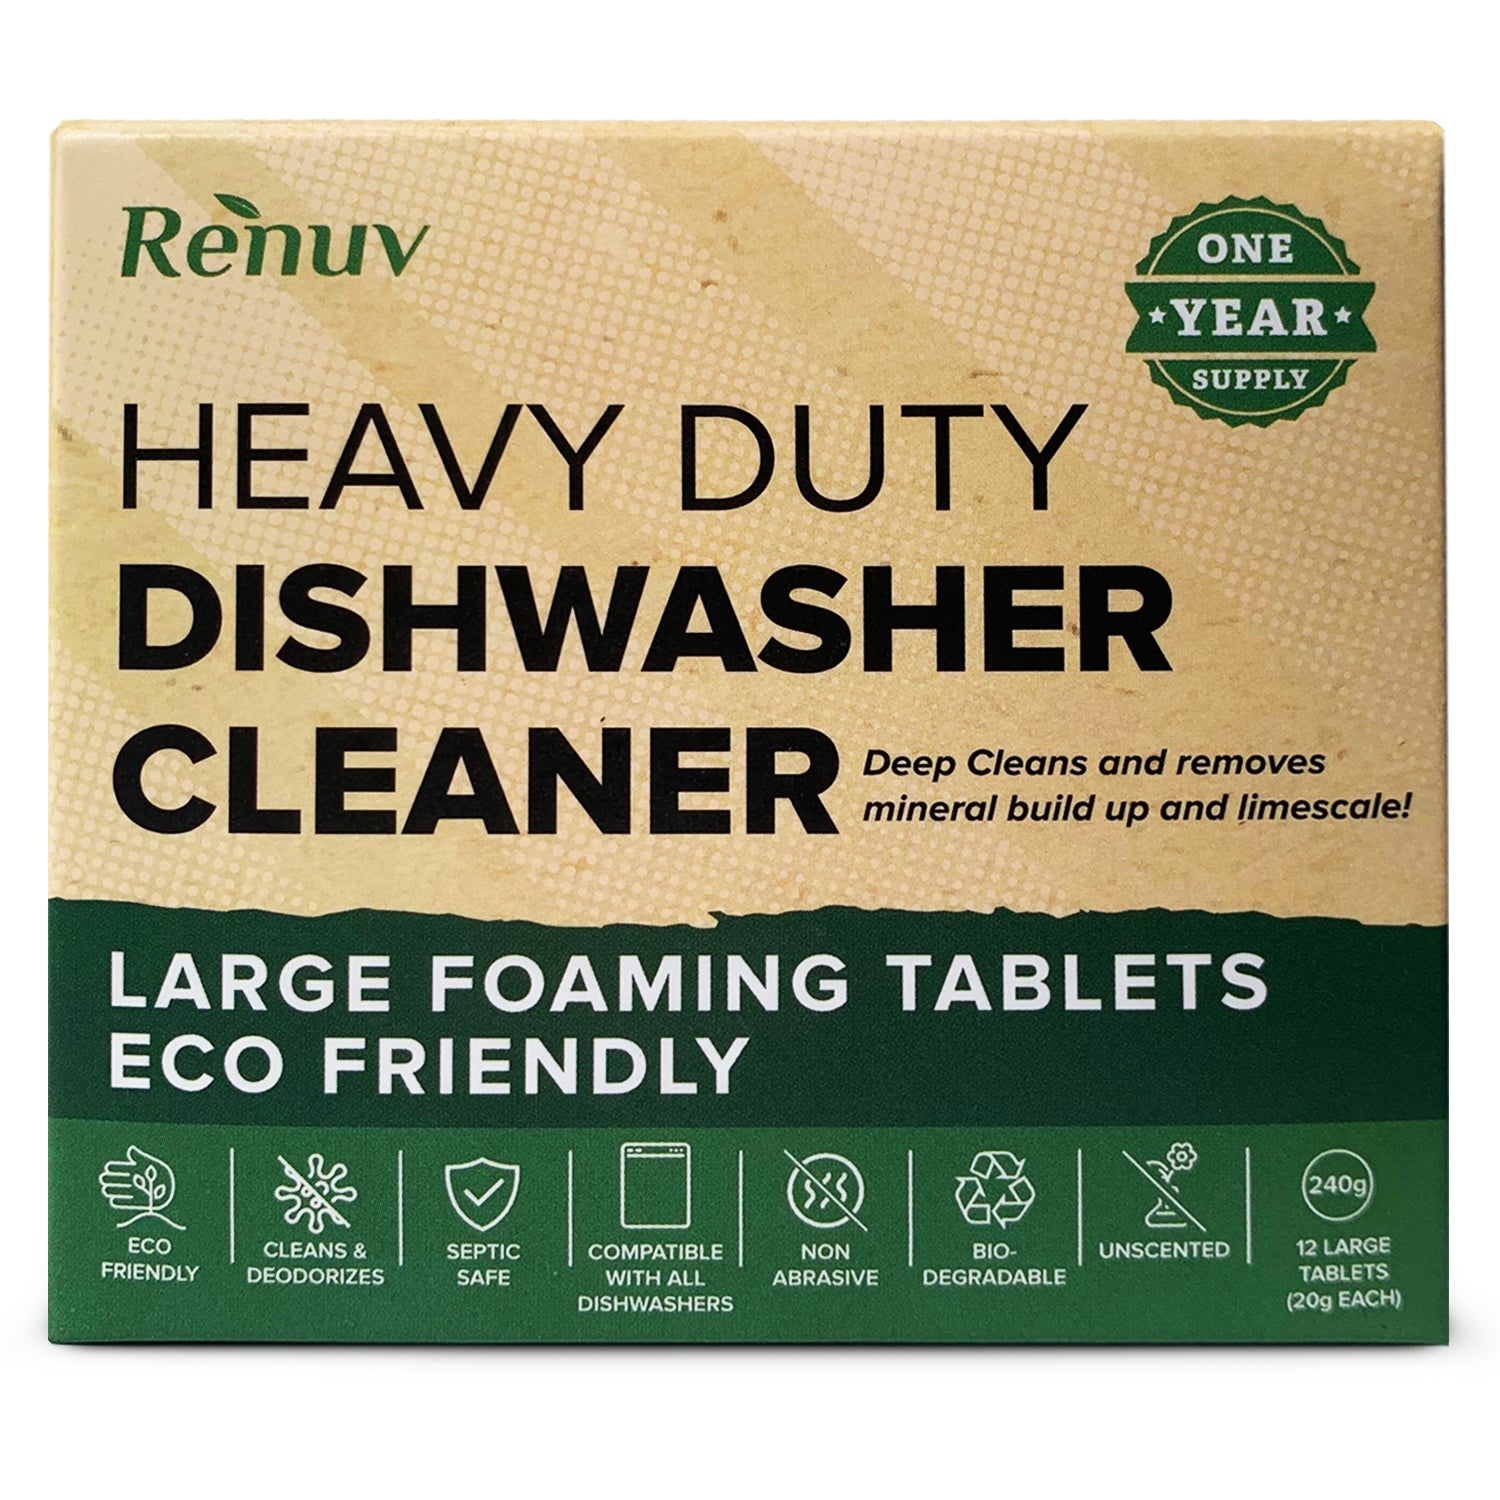 New Product Announcement! Heavy Duty Dishwasher Cleaner!